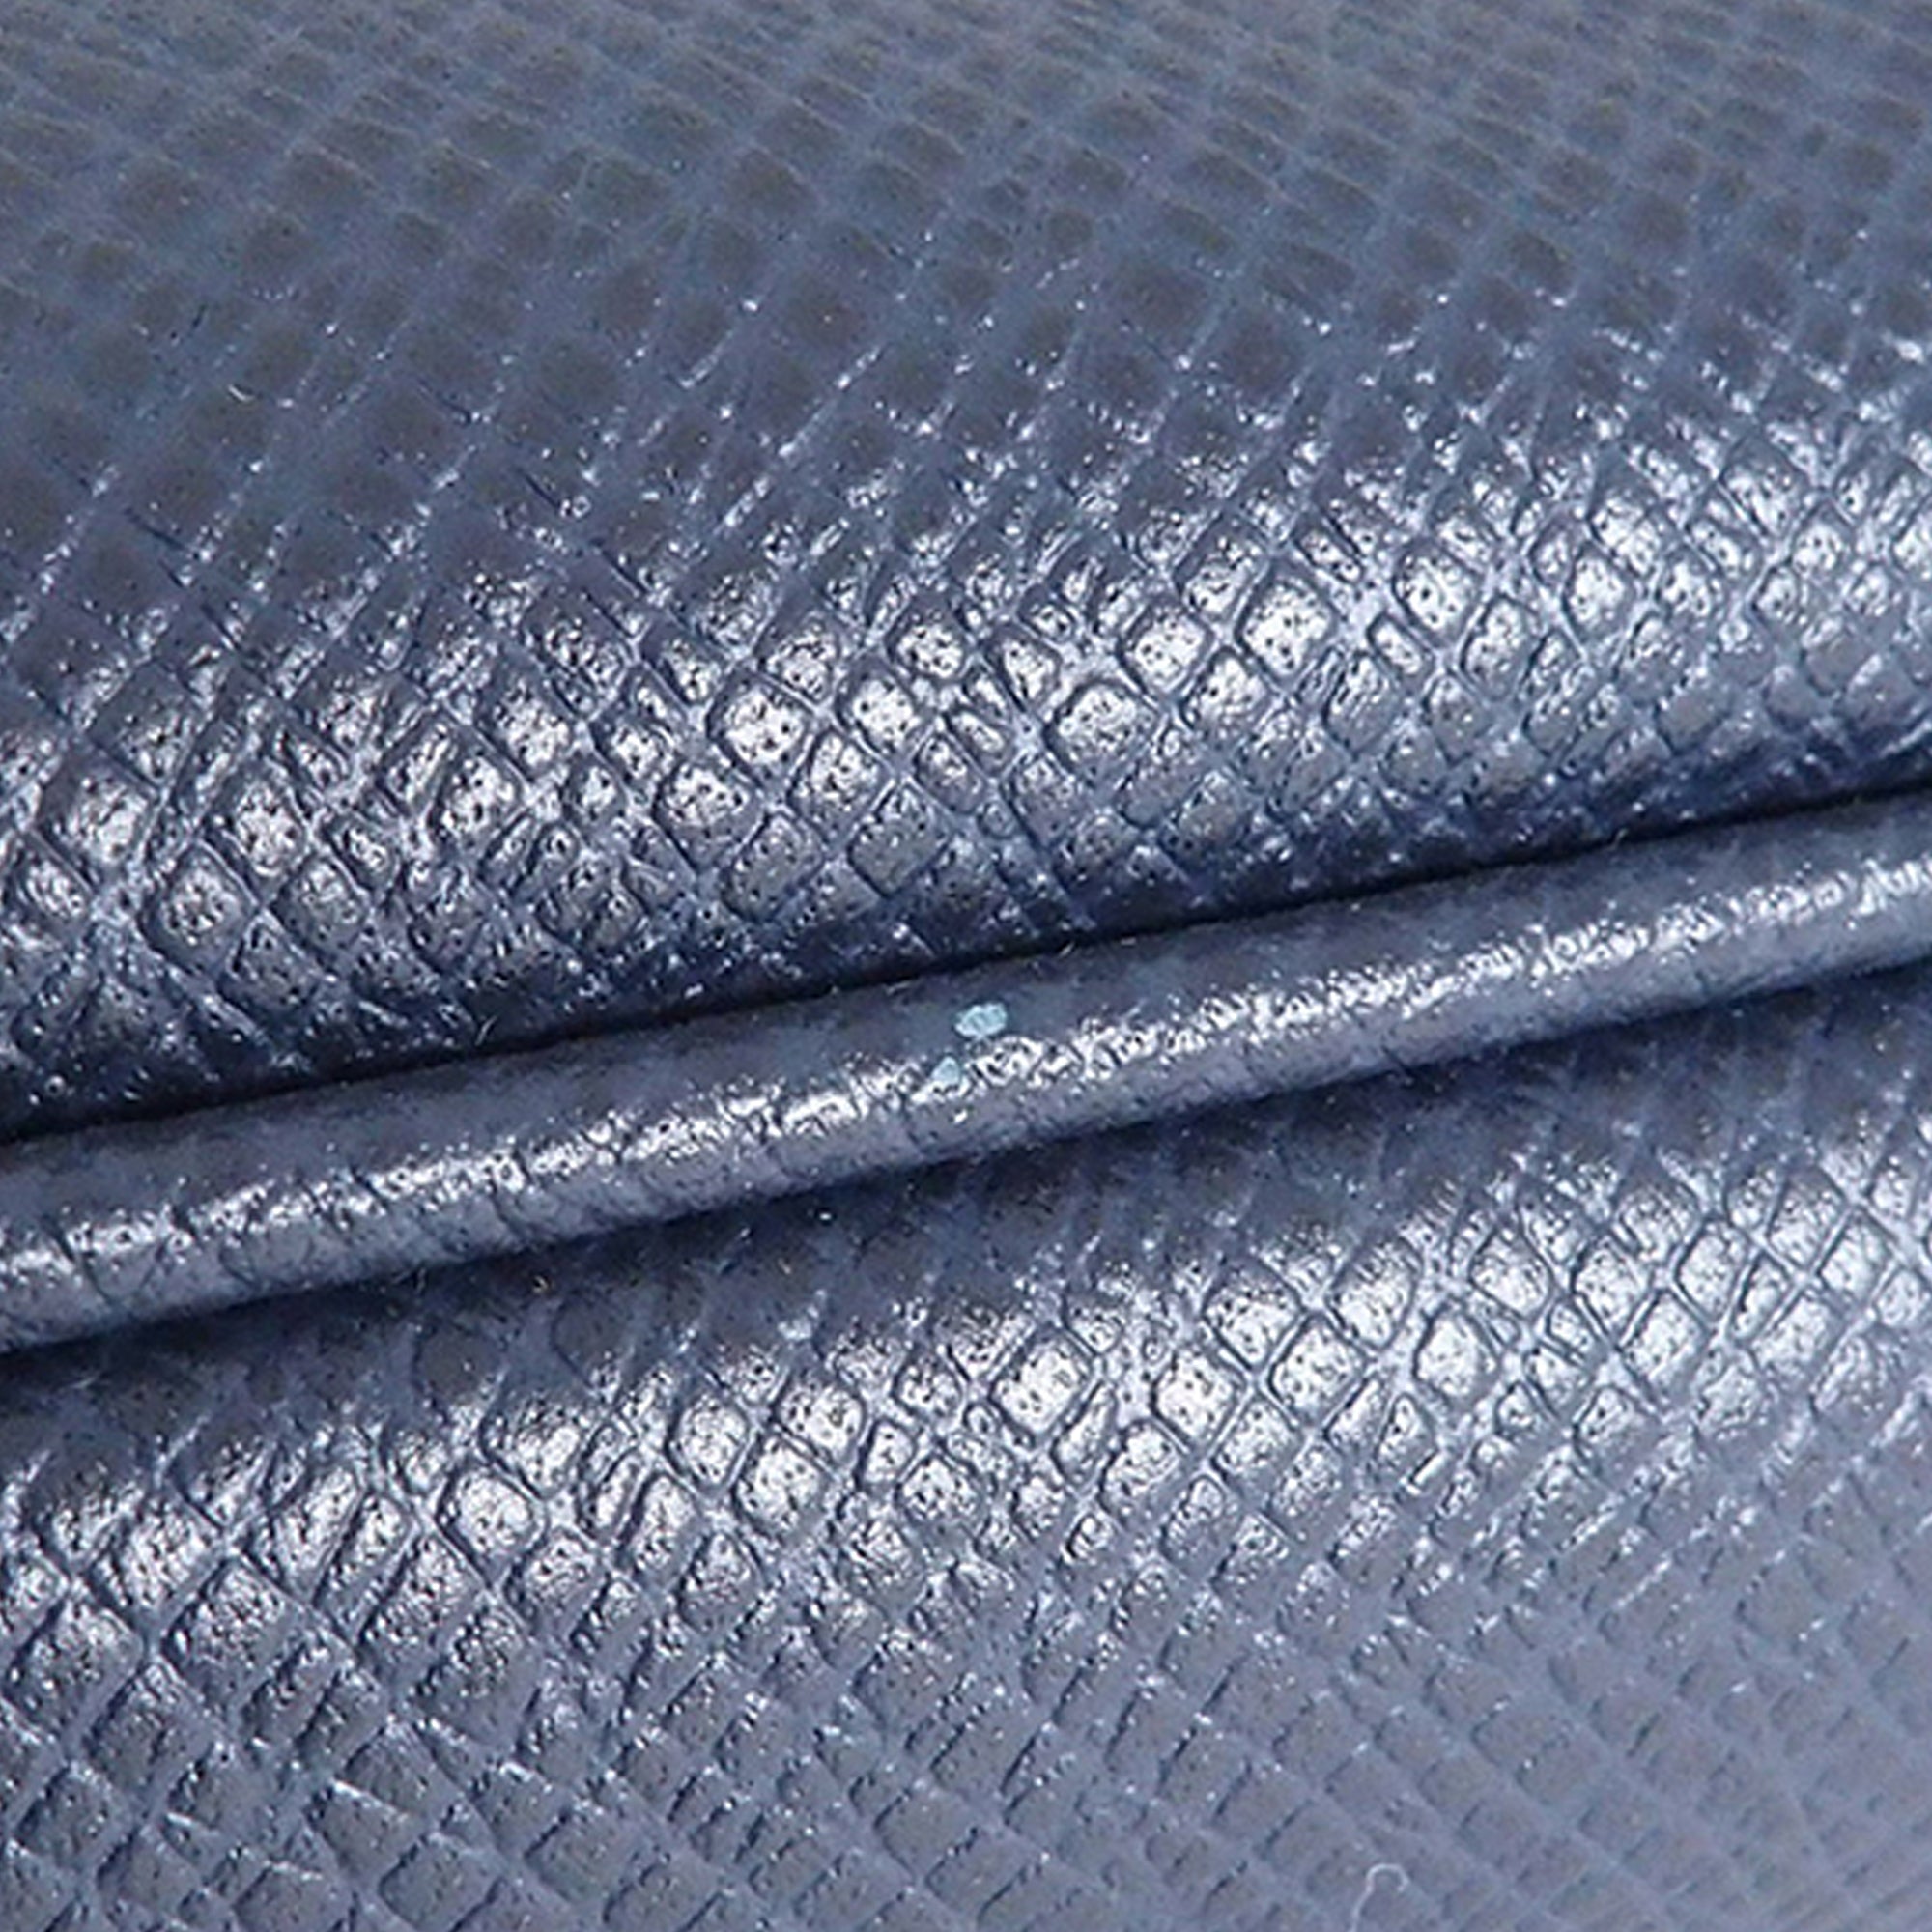 Pochette Kasai Taiga Leather - Wallets and Small Leather Goods